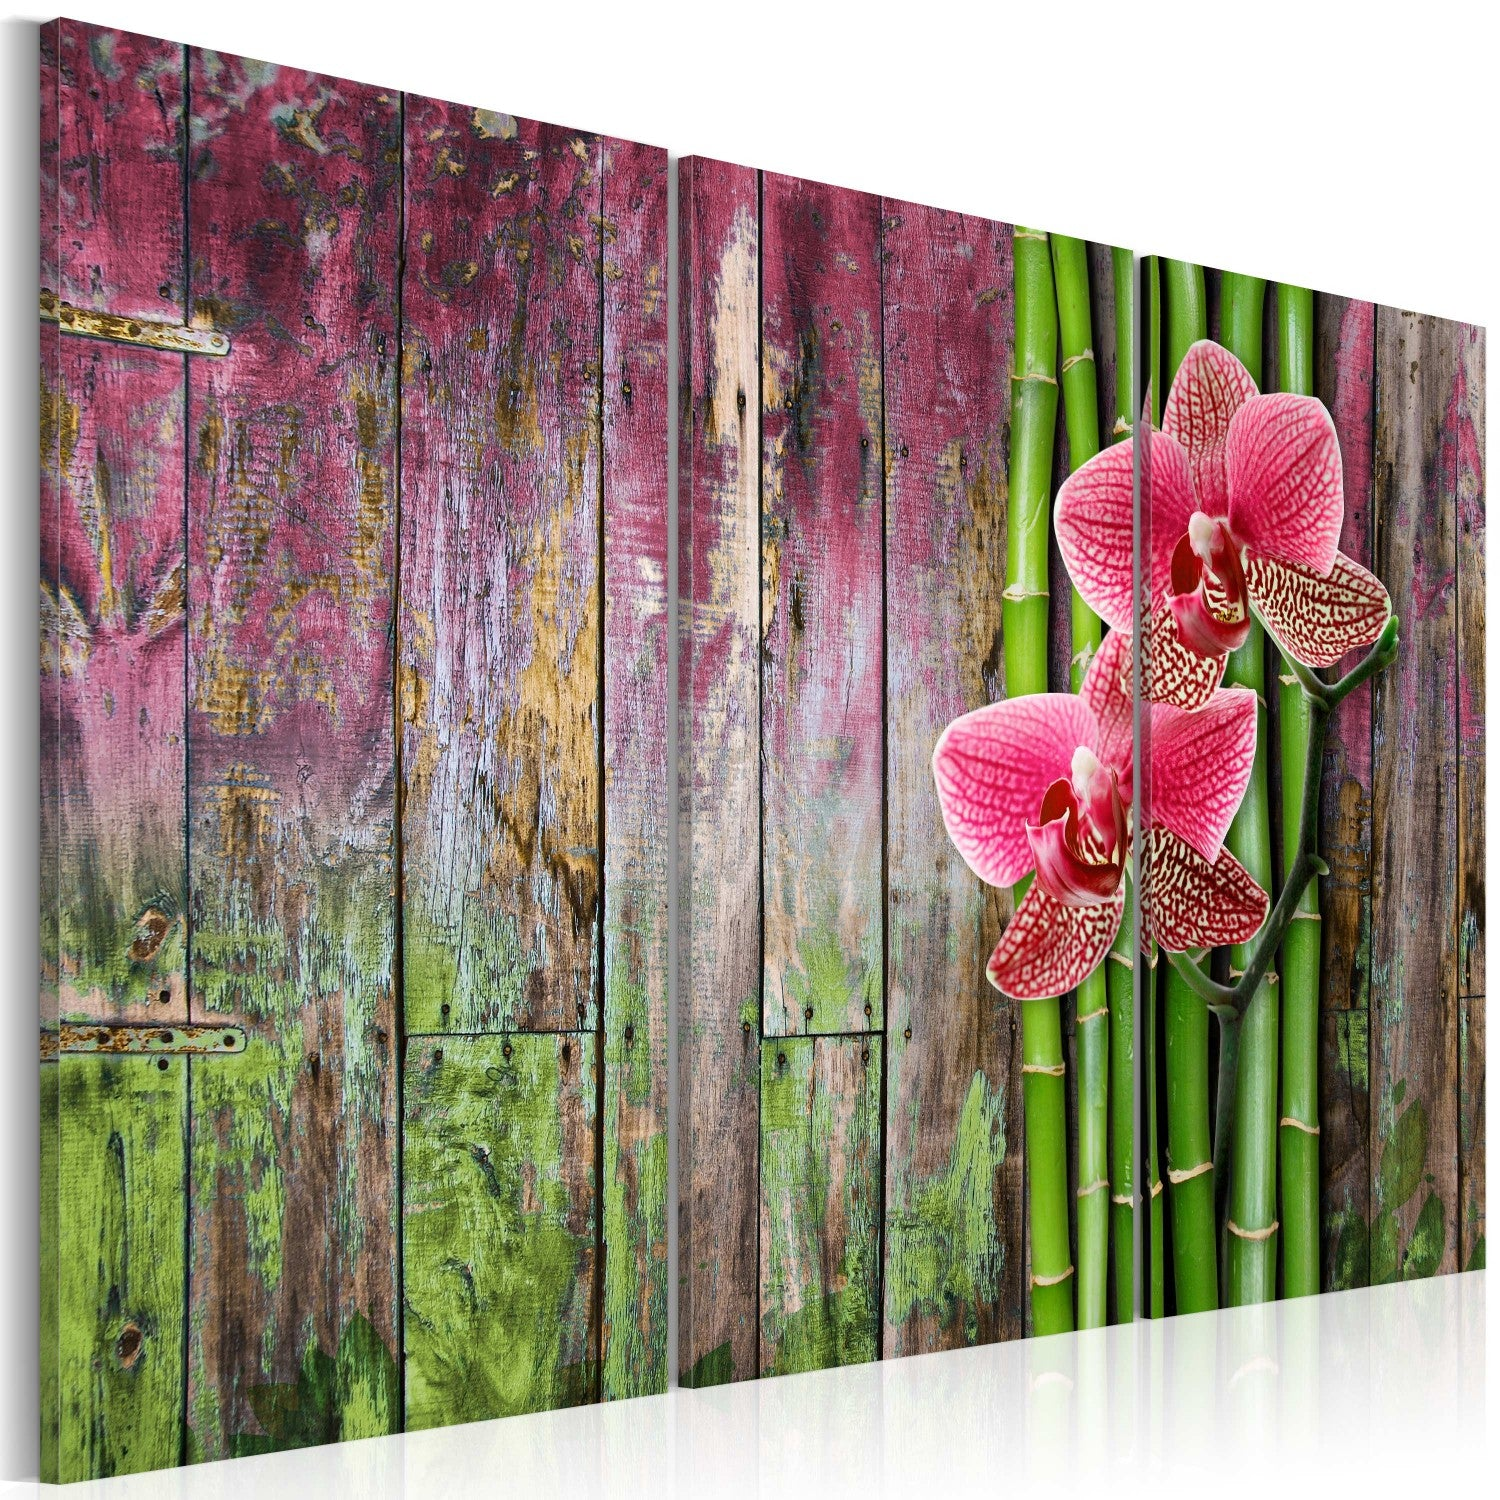 Canvas Painting - Flower & Bamboo